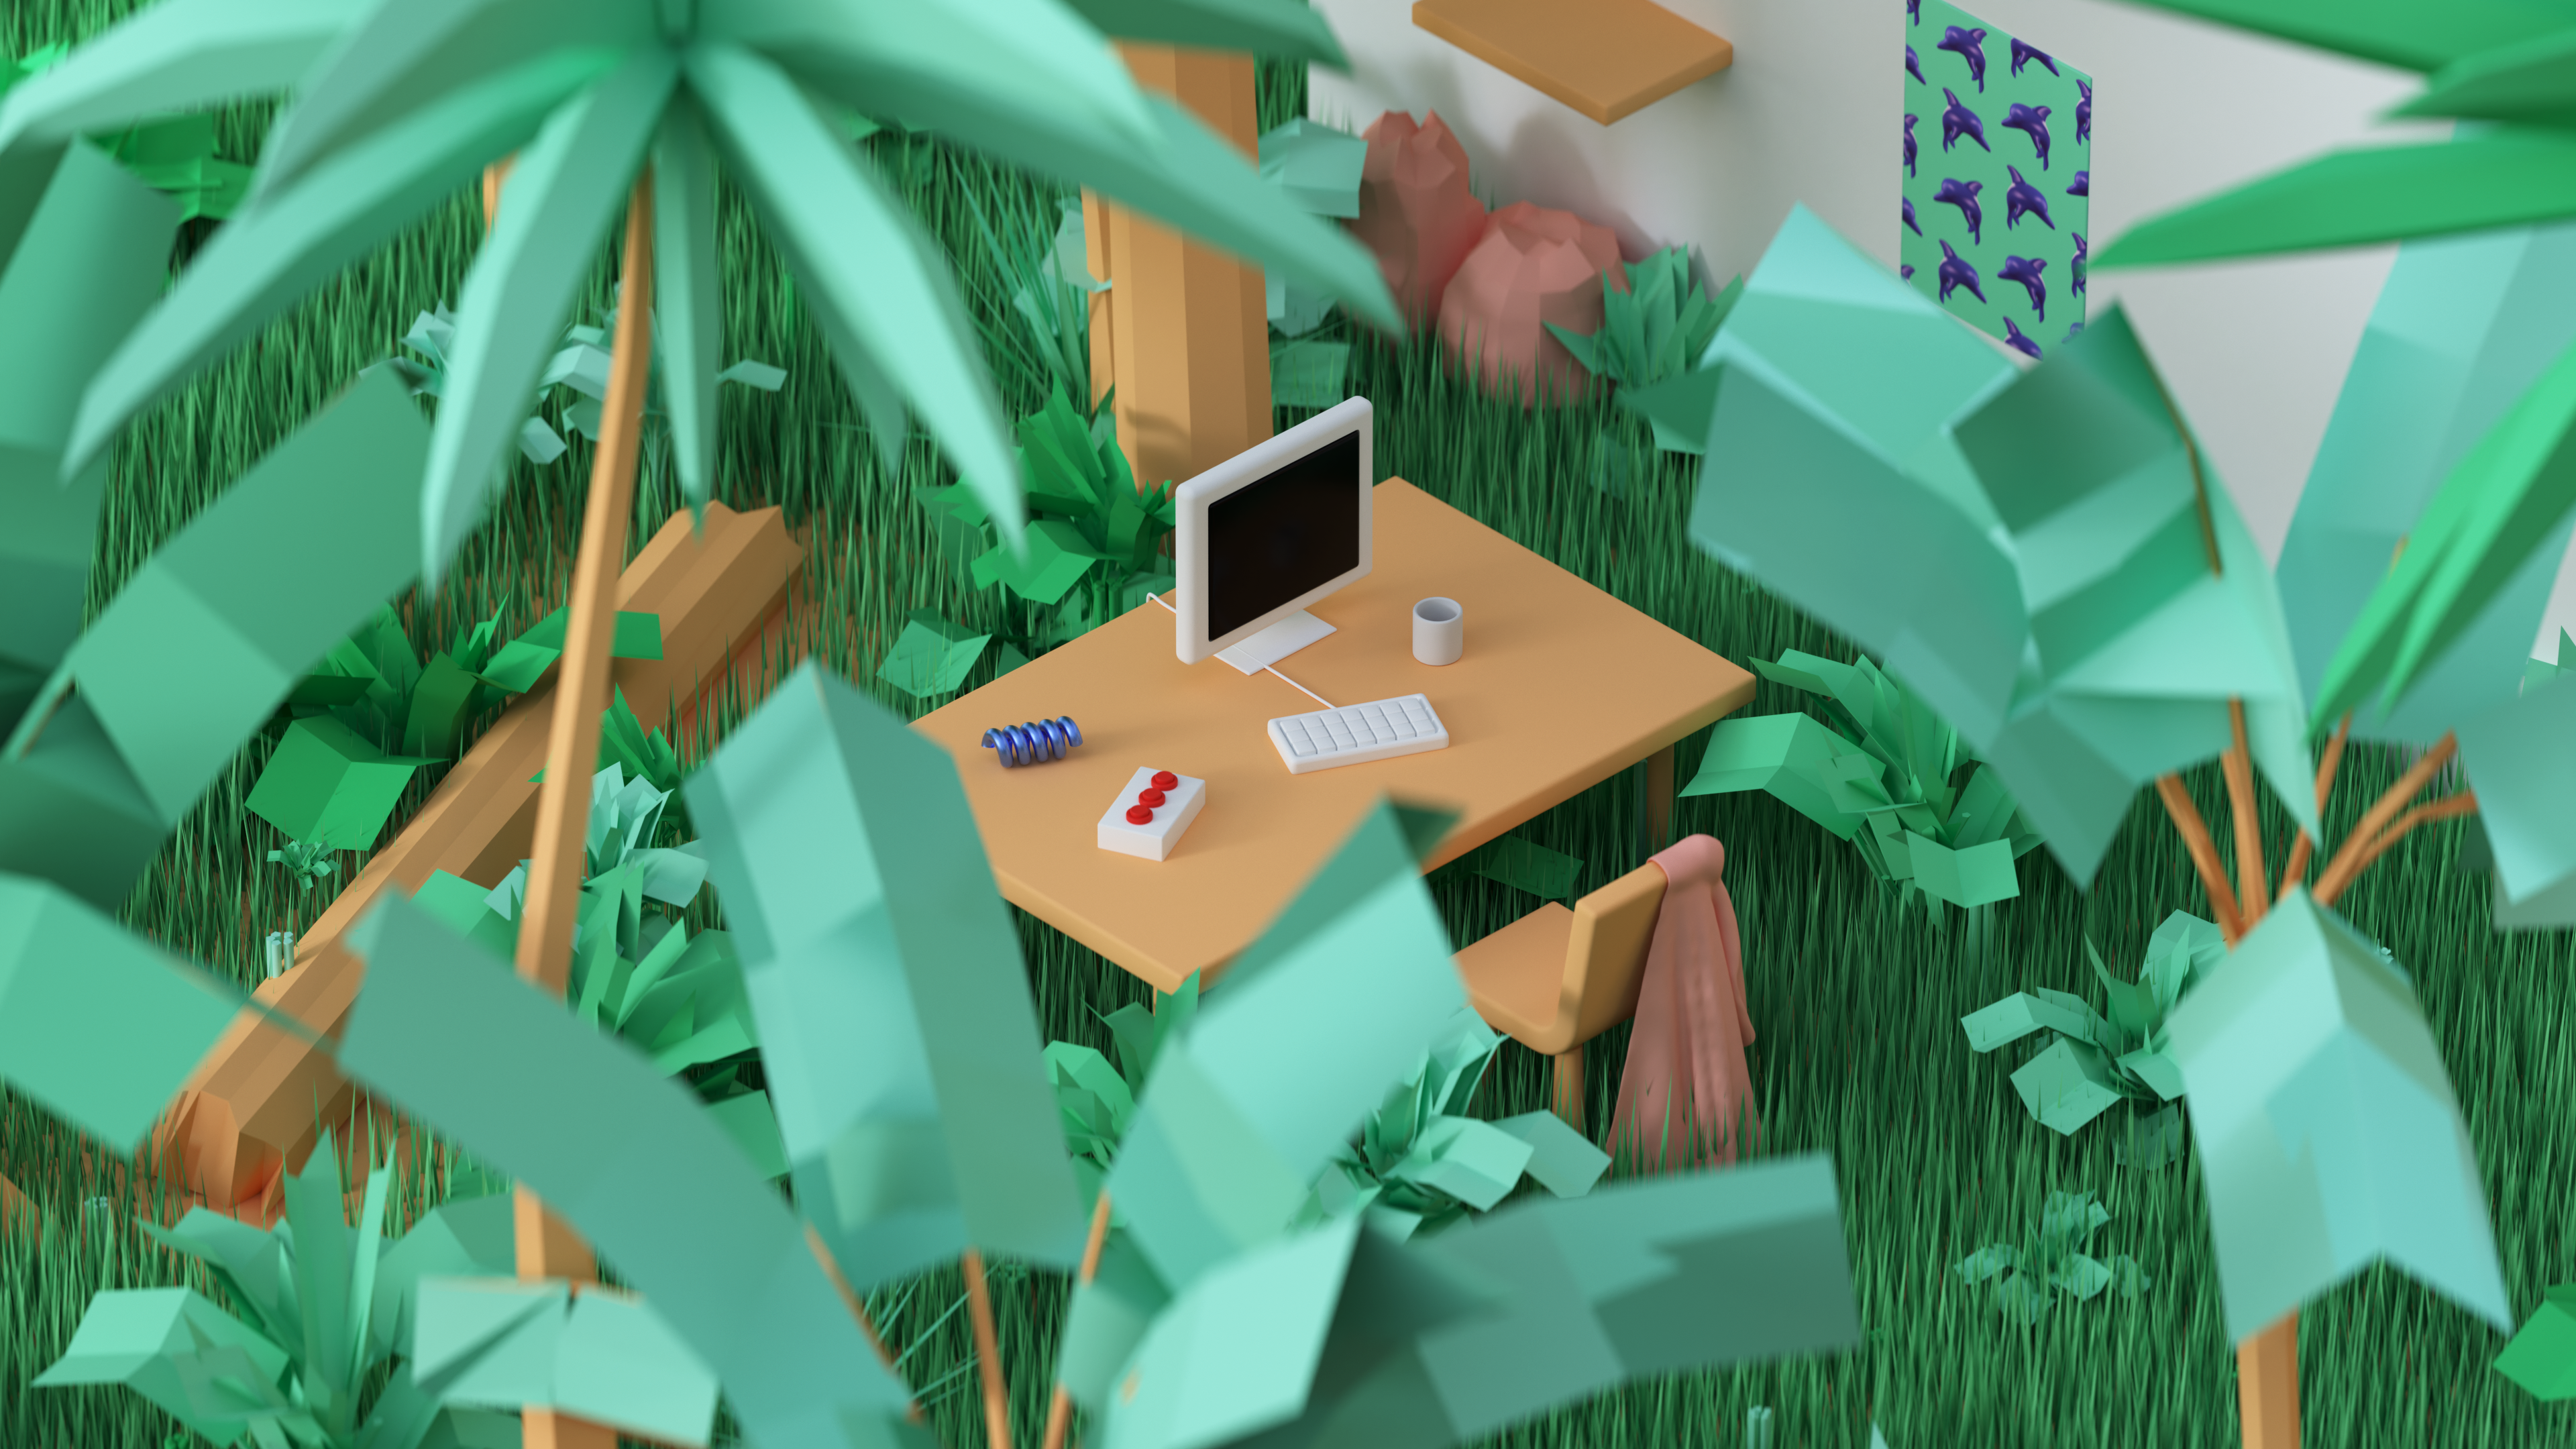 A desk with a white monitor, mug, and keyboard, with a chair pulled up to it, sitting in the middle of a jungle - Haptic game servers are so  immersive, it's hard to remember you're gaming in the middle of a jungle.